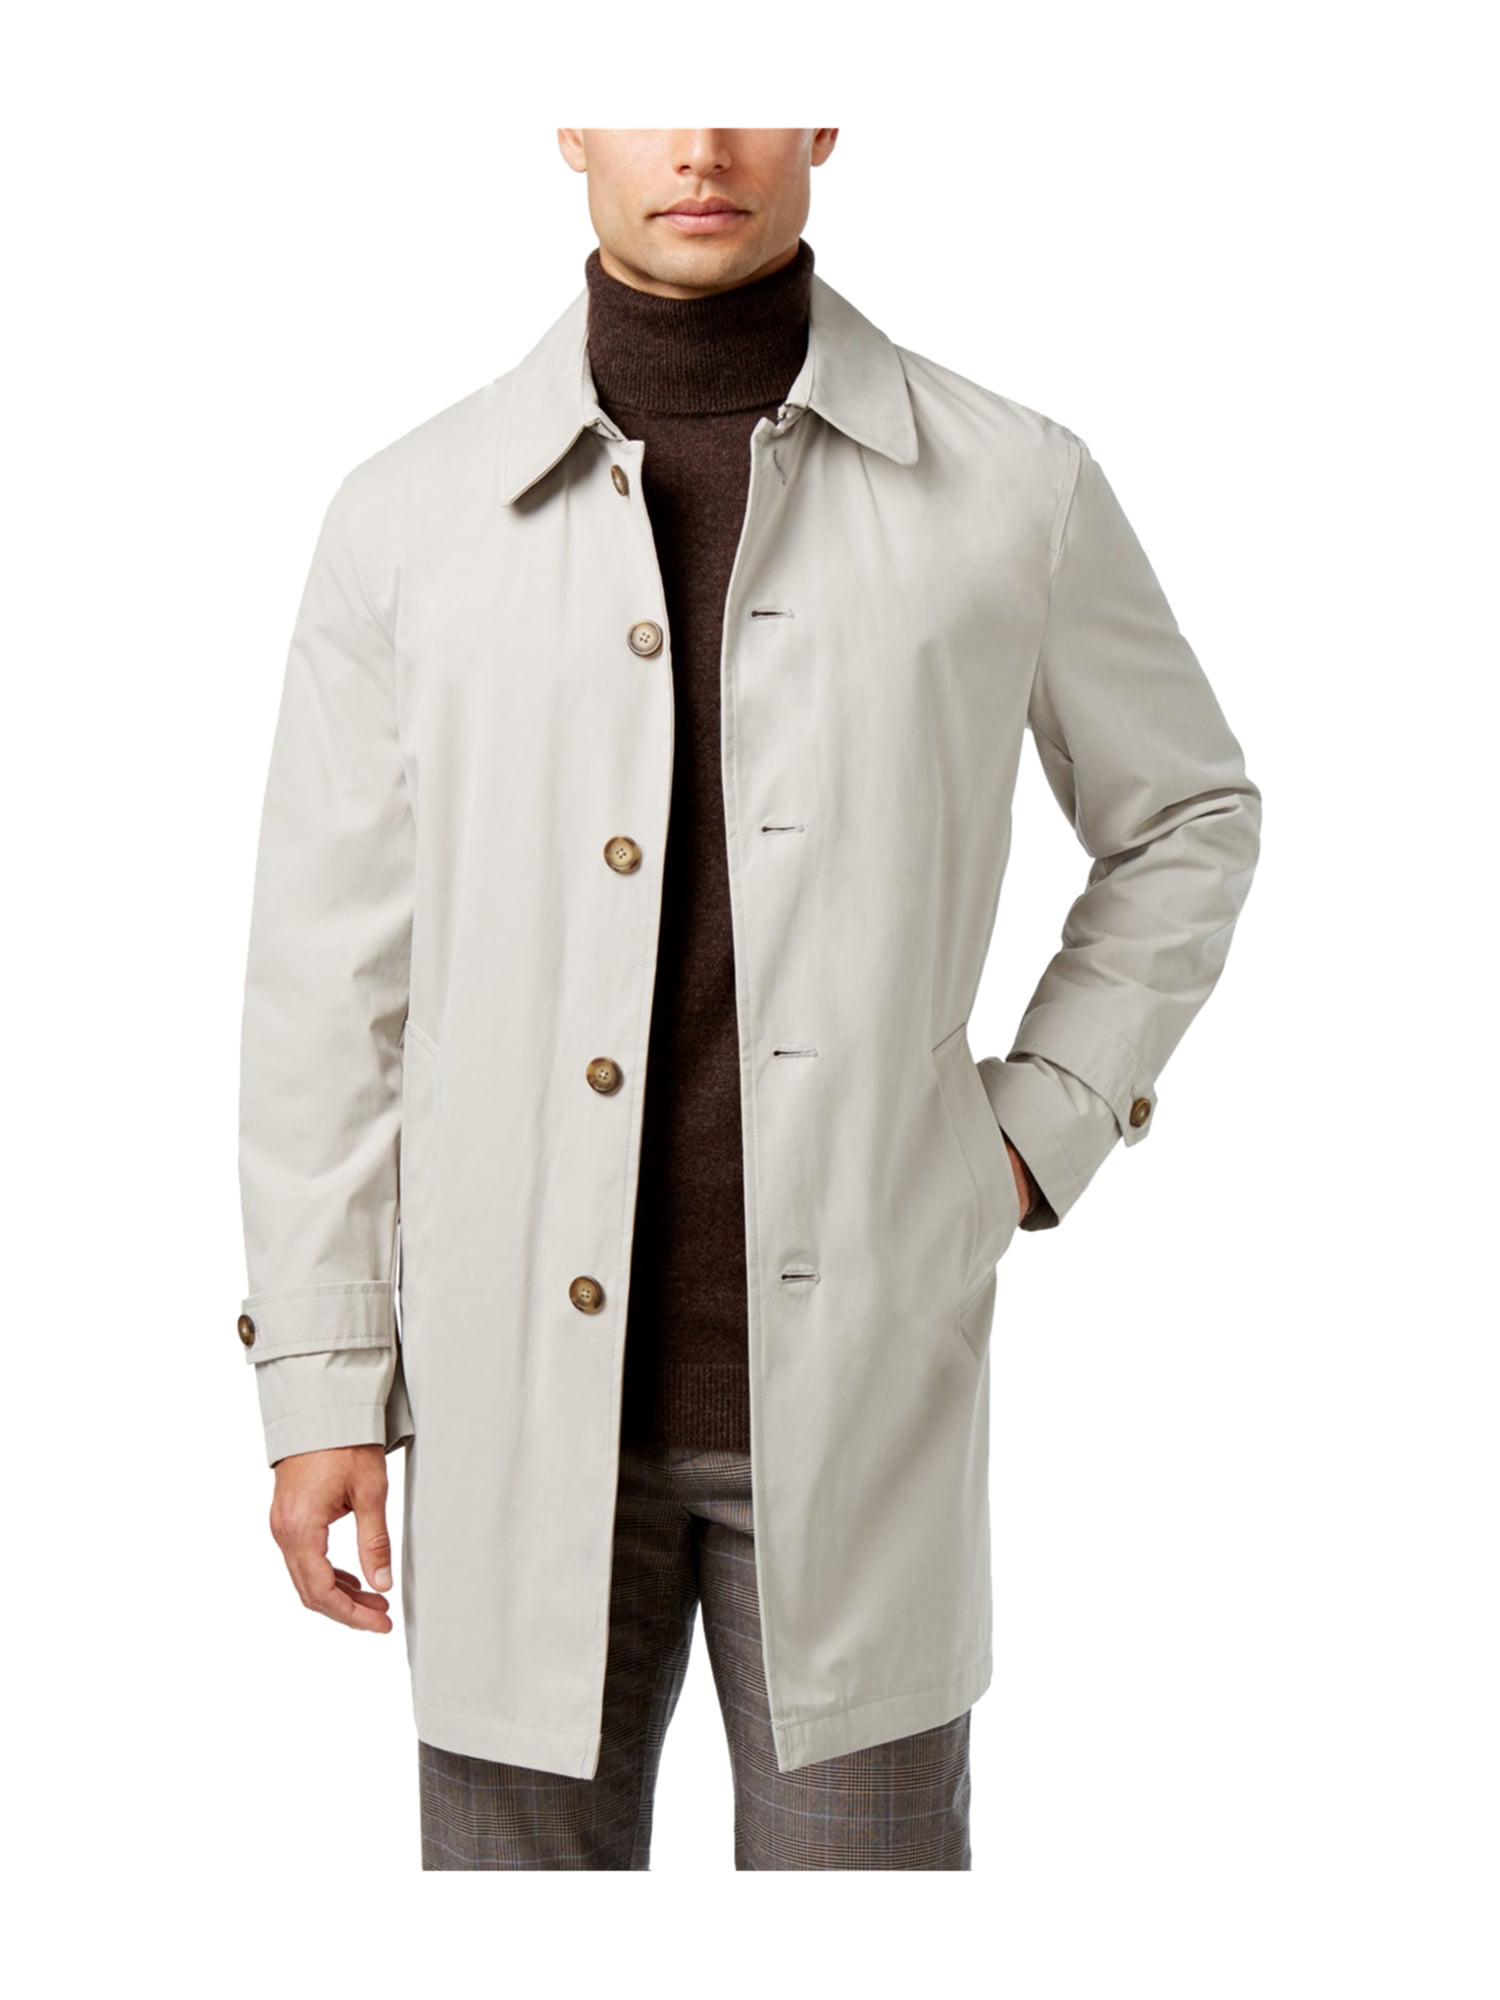 tommy hilfiger trench coat mens